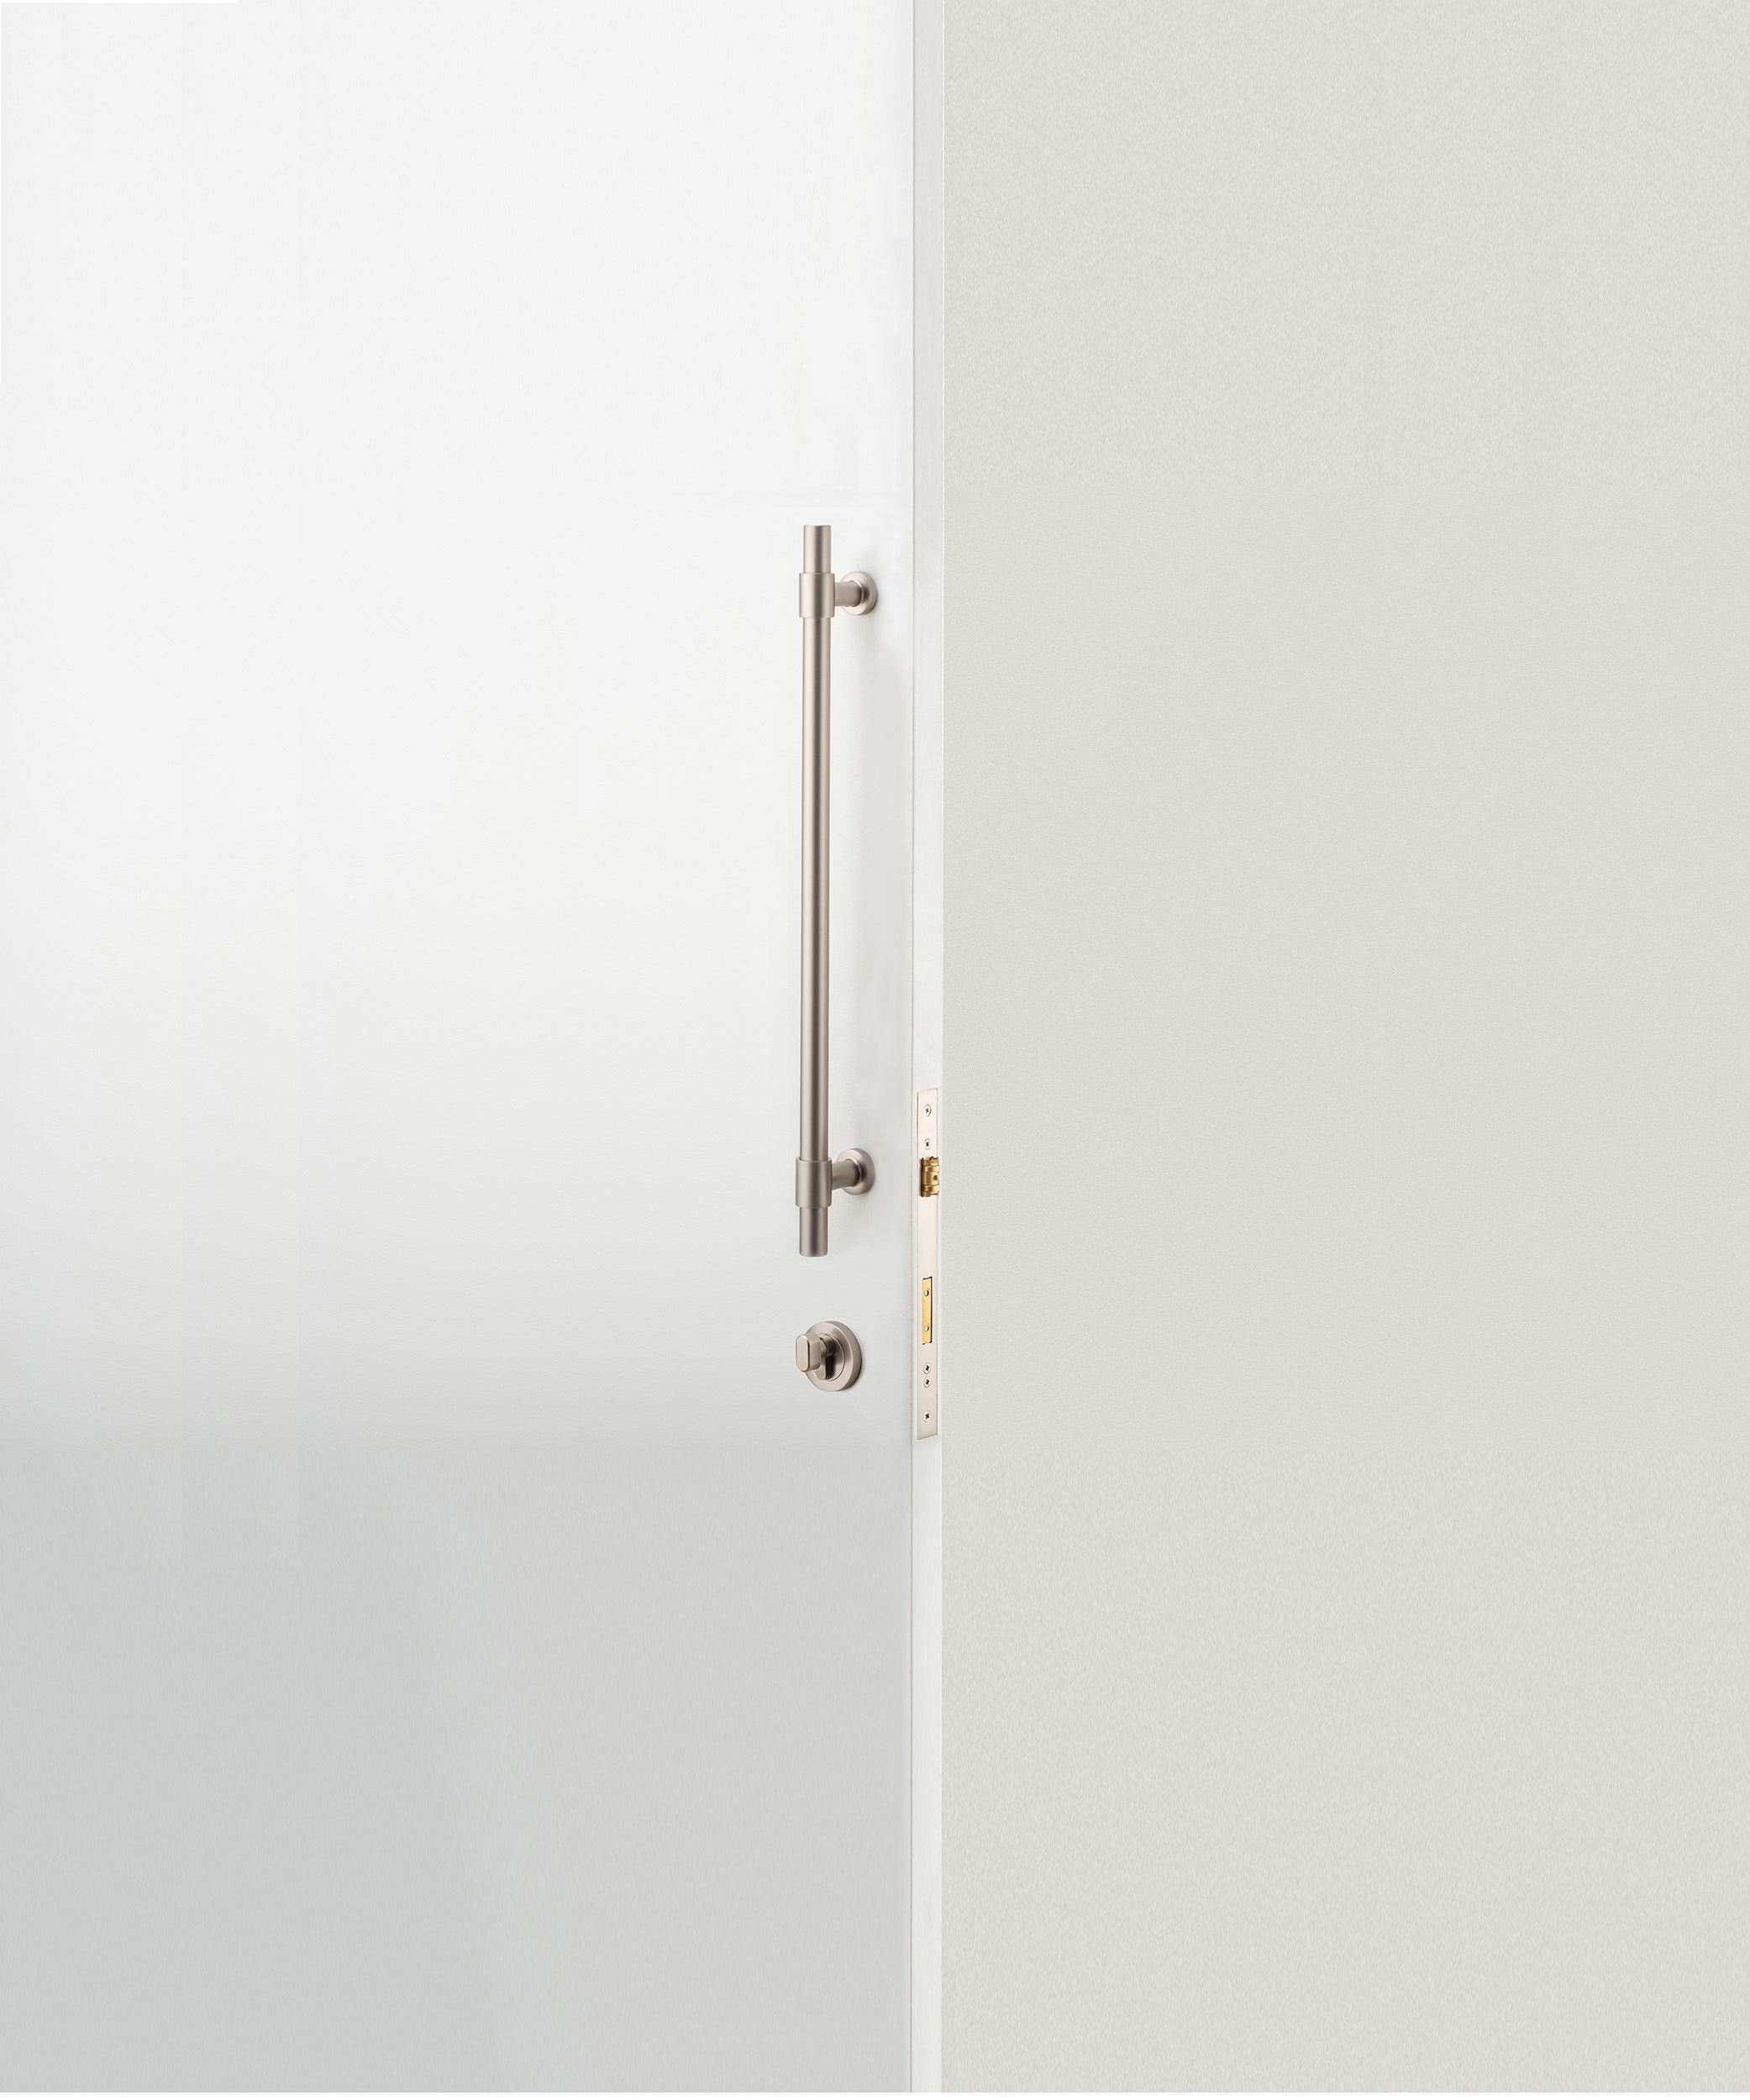 0489KENTR60KT - Berlin Pull Handle - 600mm Entrance Kit with Separate High Security Lock - Satin Nickel - Entrance